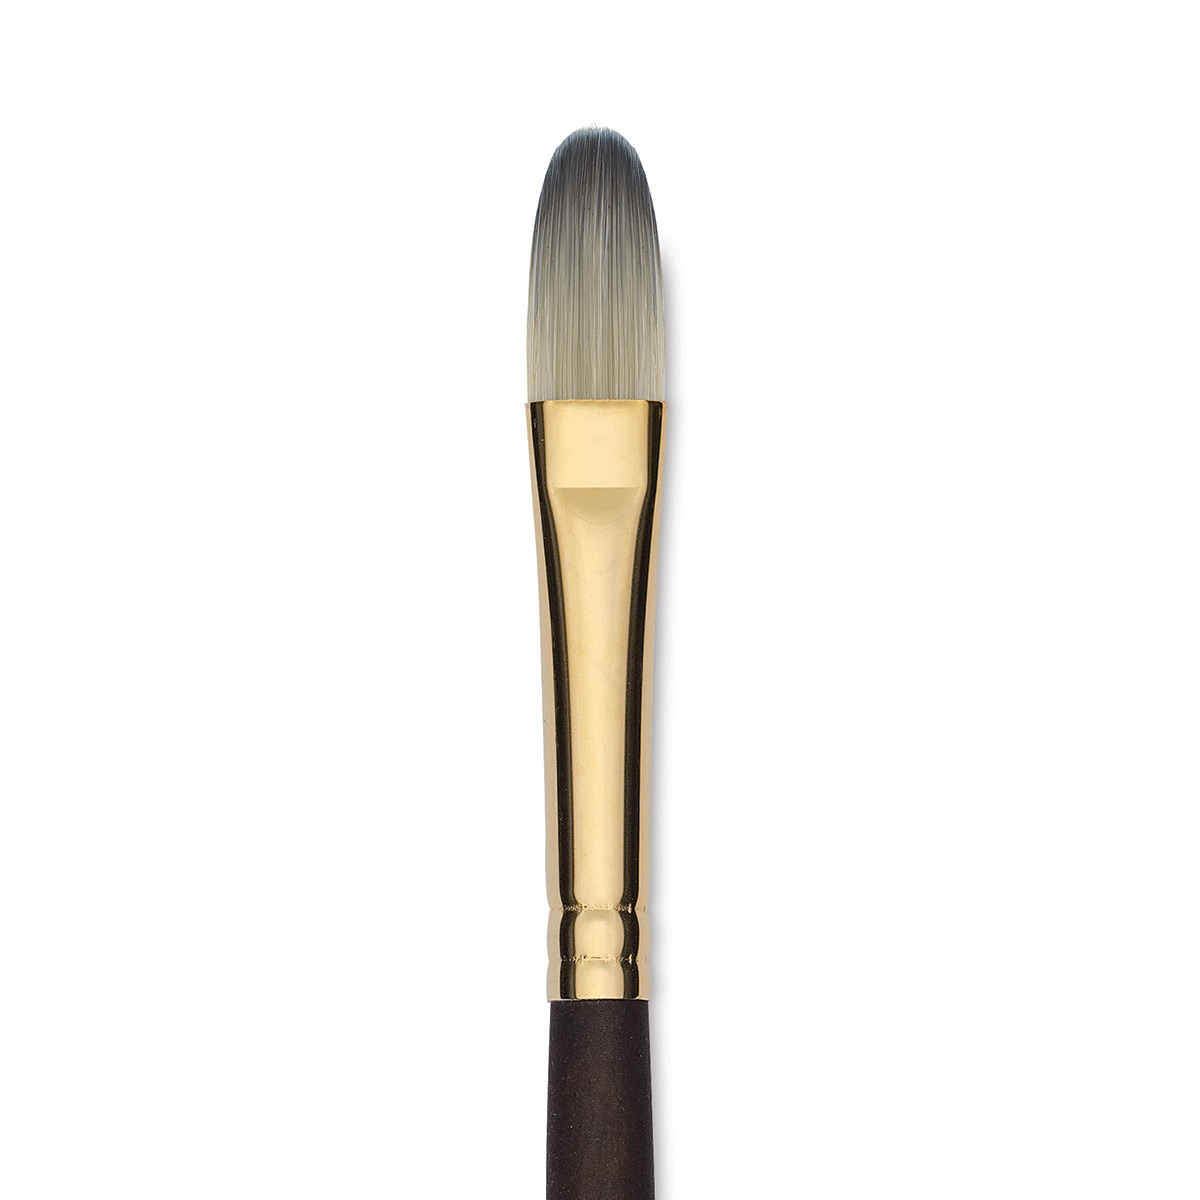 Princeton Series 6300 Synthetic Bristle Brushes